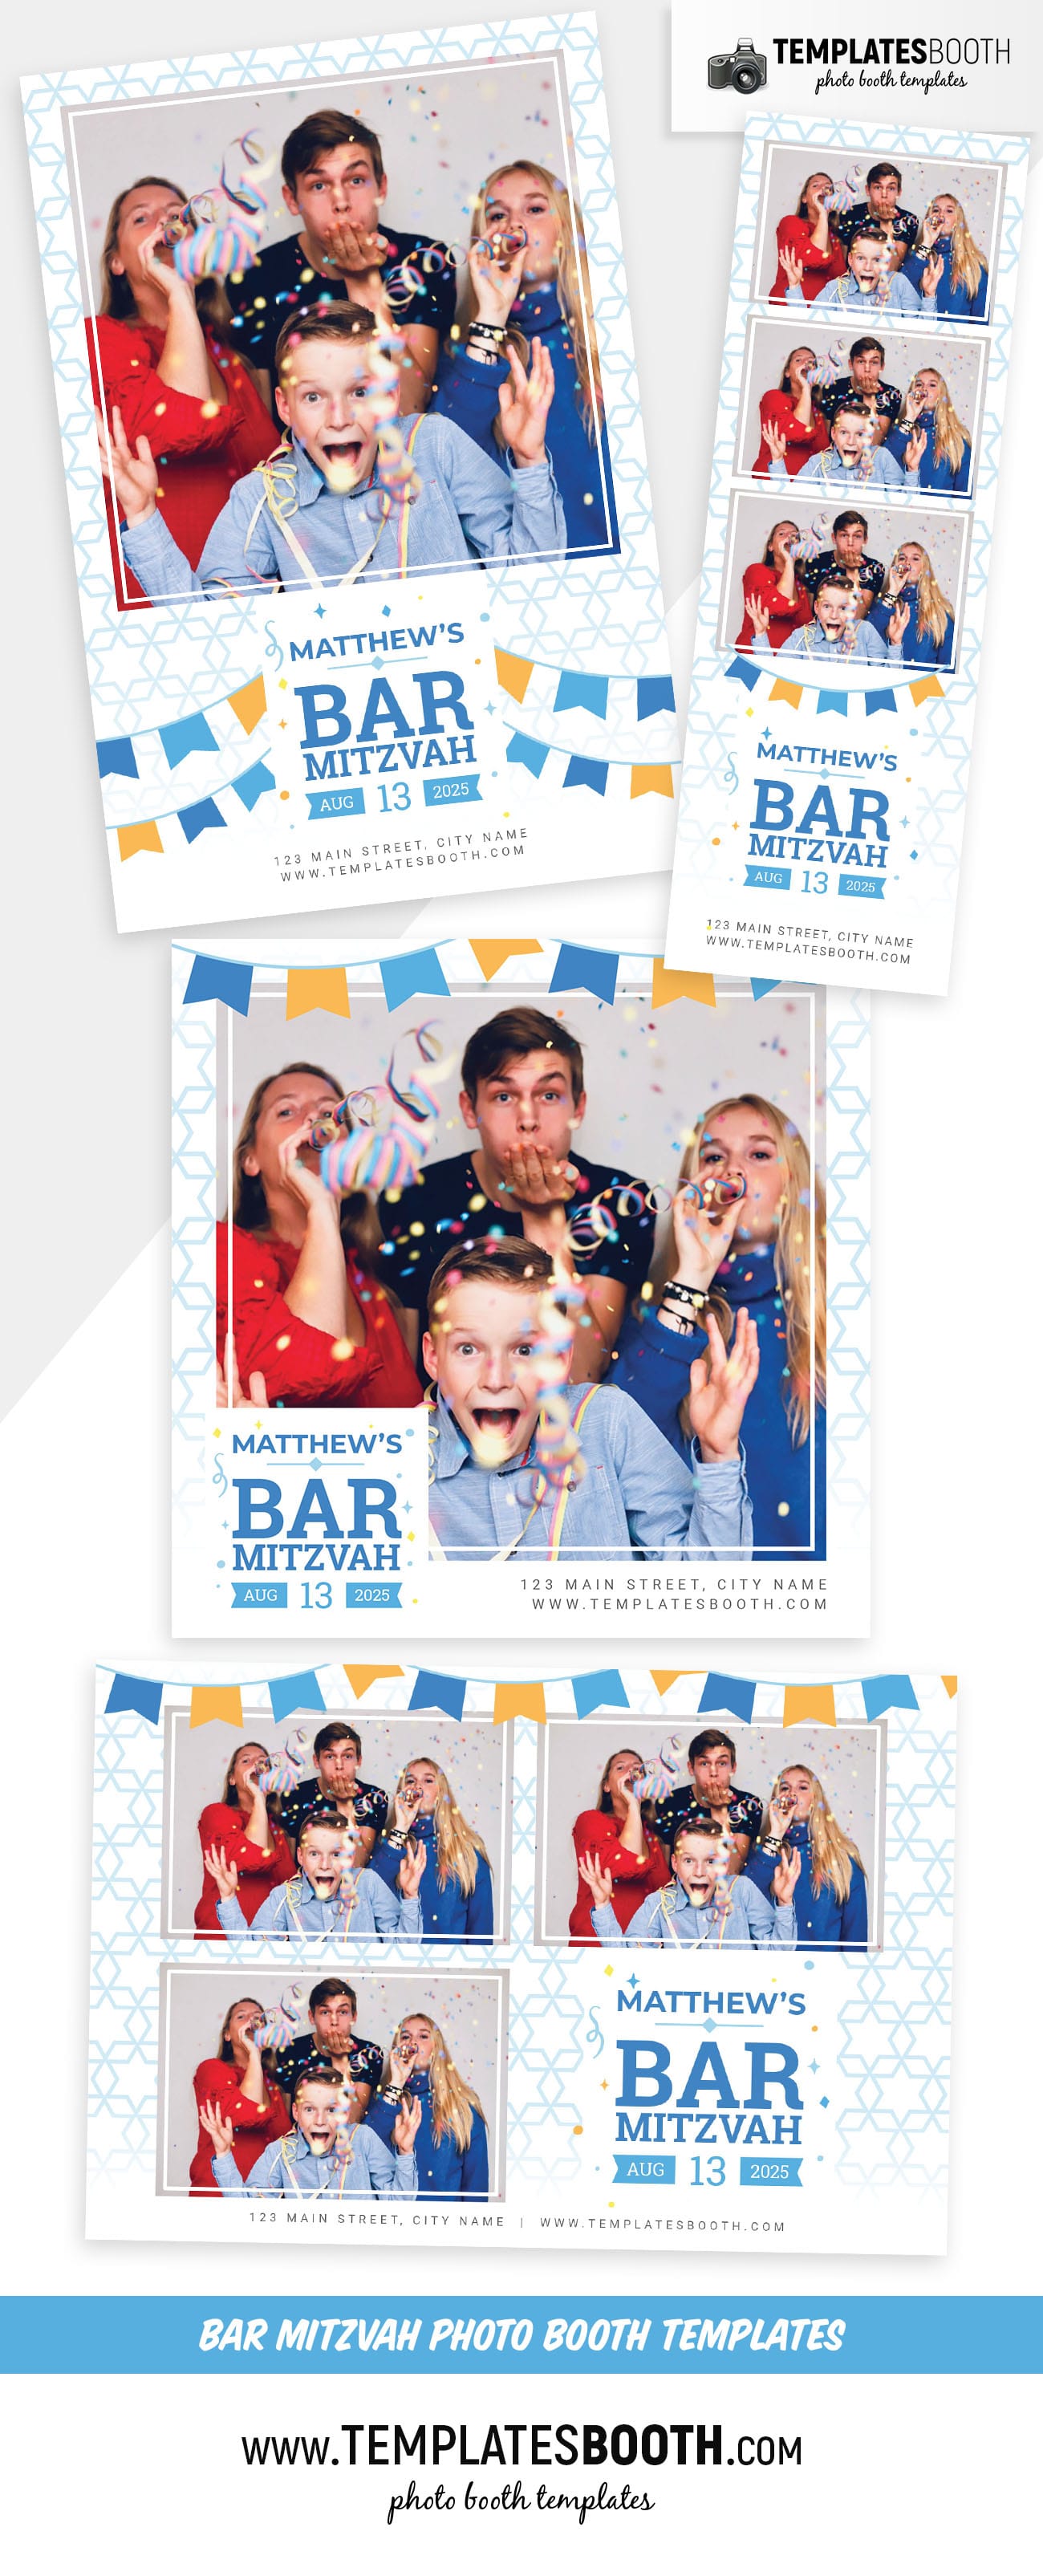 Bar Mitzvah Photo Booth Template (Full Preview)